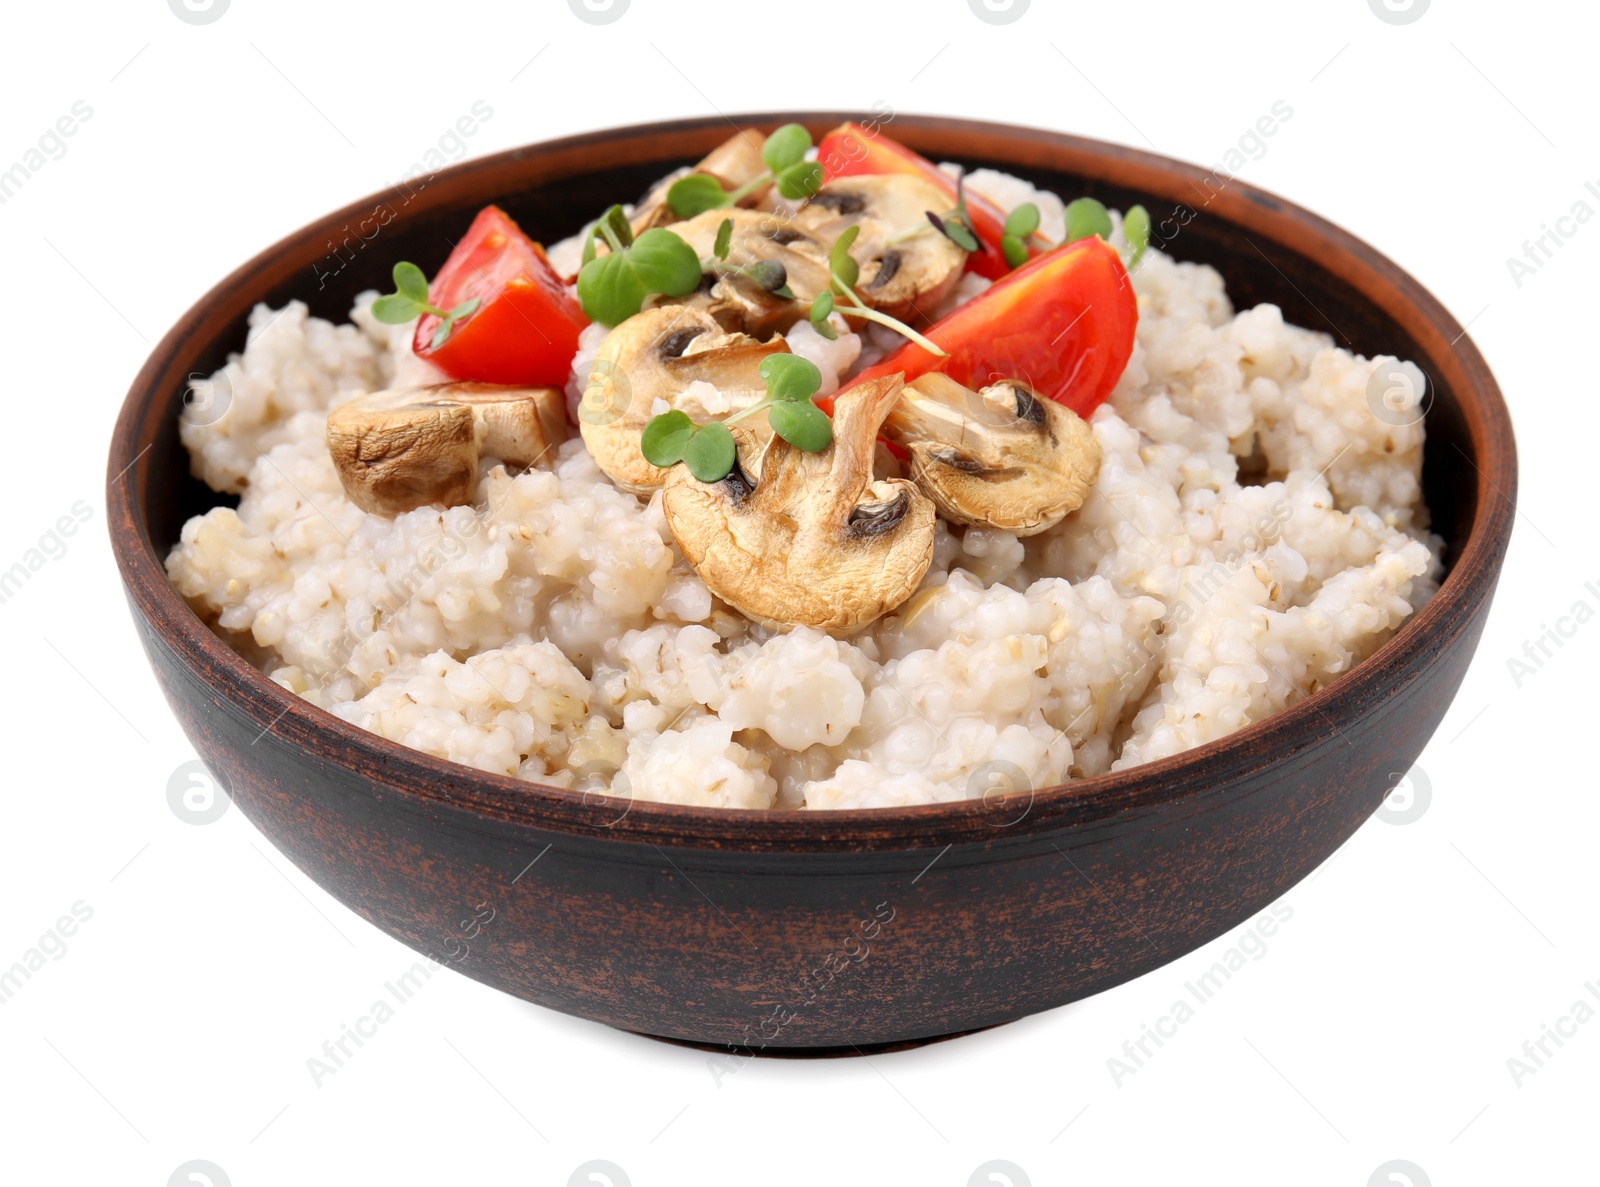 Photo of Delicious barley porridge with mushrooms, tomatoes and microgreens in bowl isolated on white